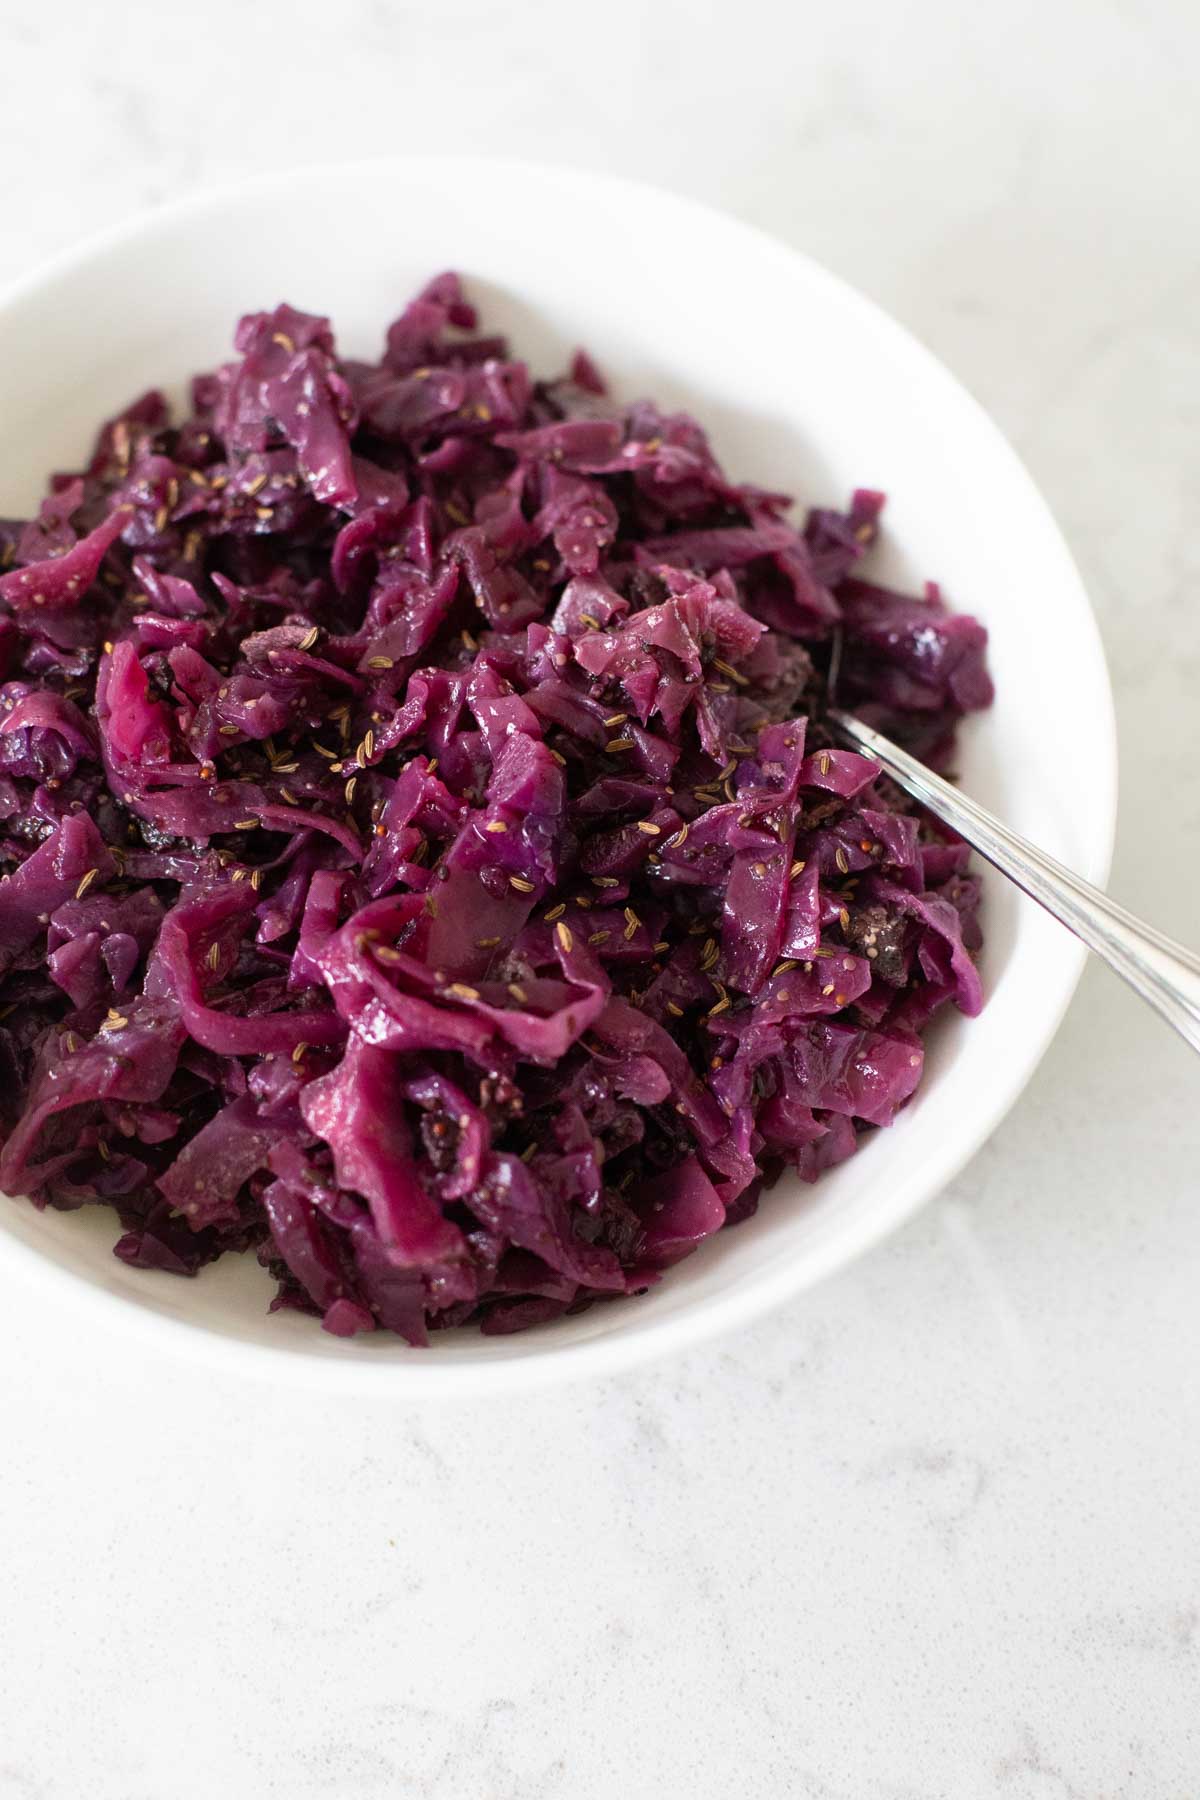 A white bowl filled with shredded cooked red cabbage.